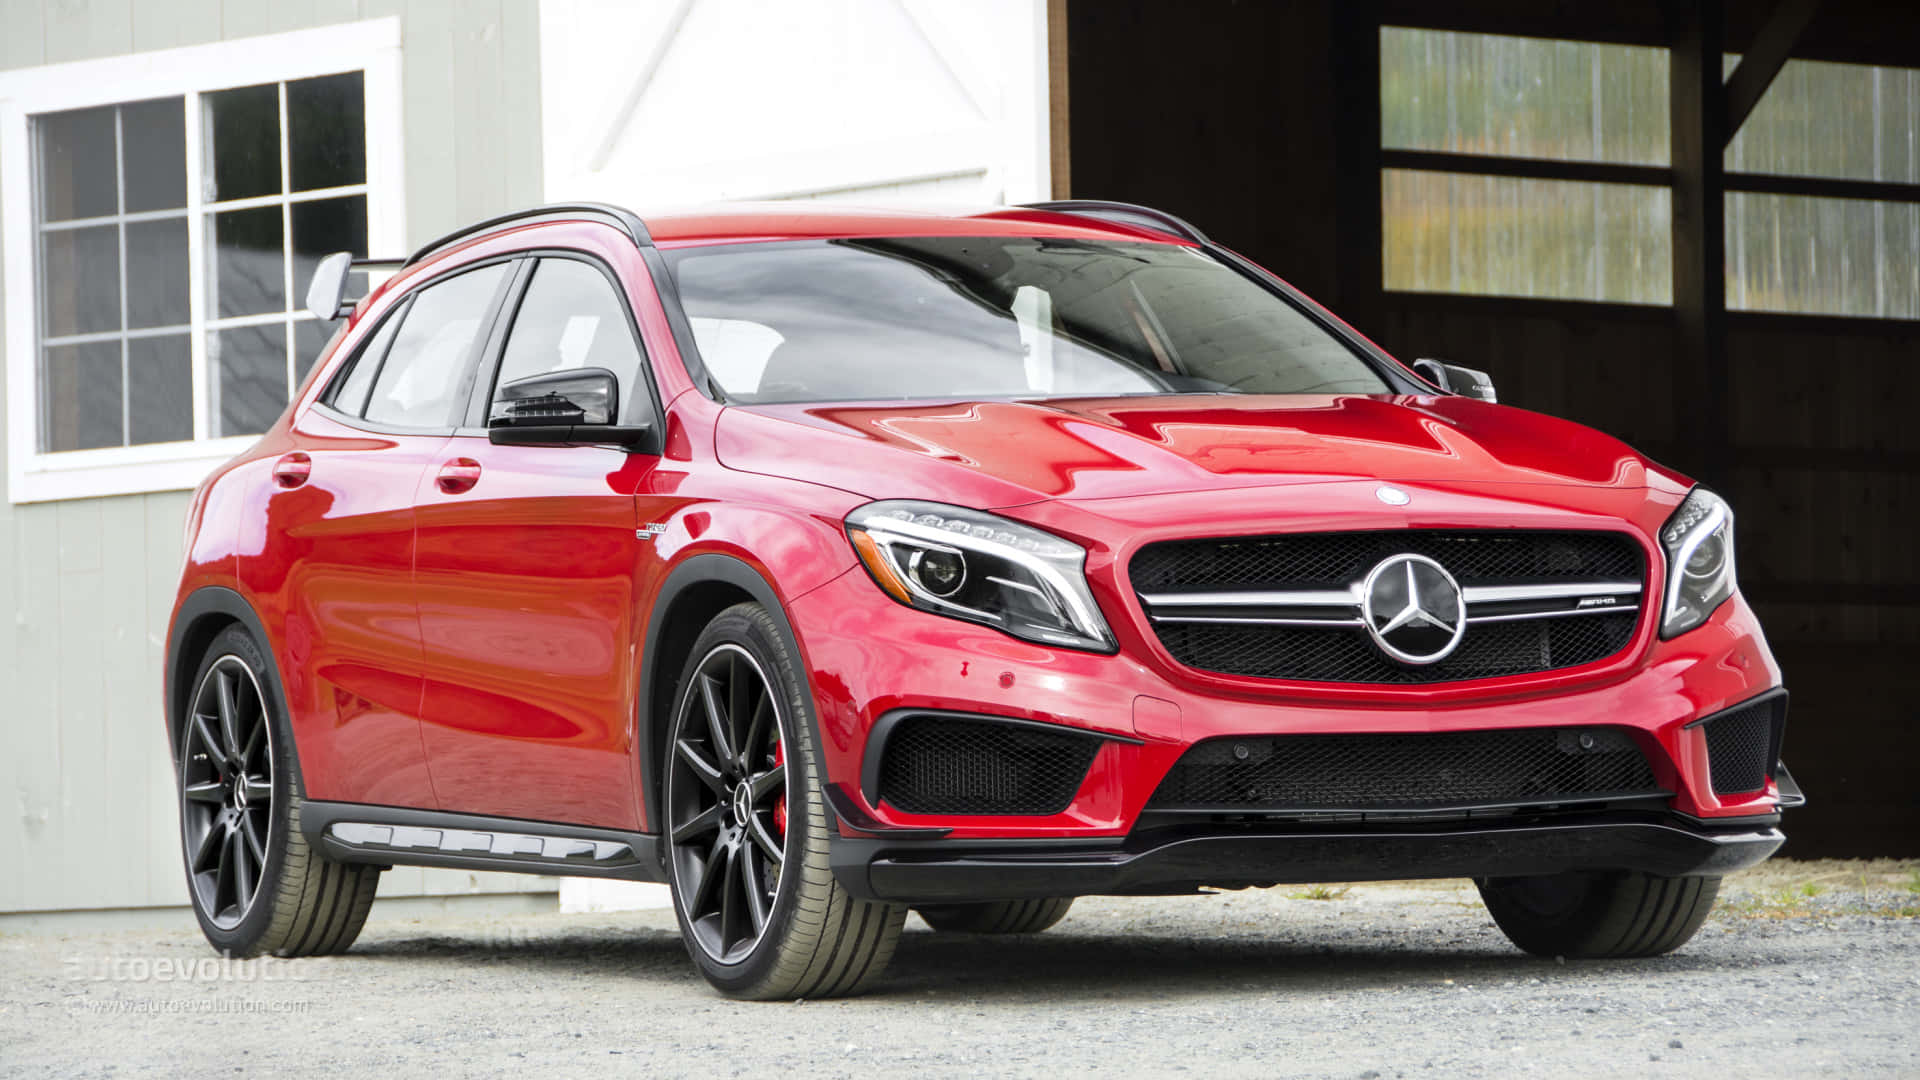 Powerful Stance of the Mercedes-Benz GLA-Class Wallpaper